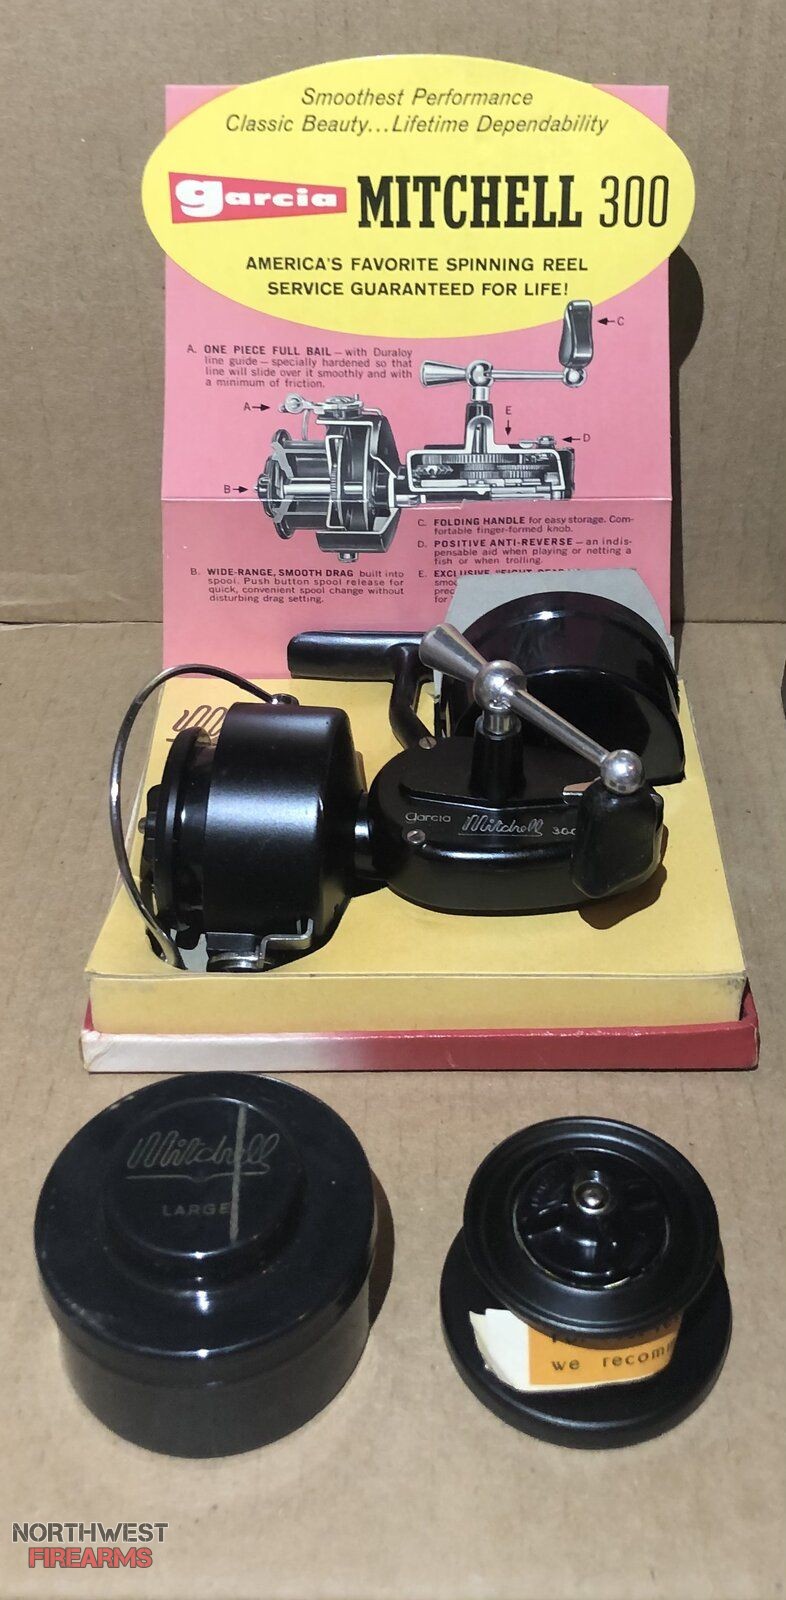 Vintage fishing reels. New old stock in boxes